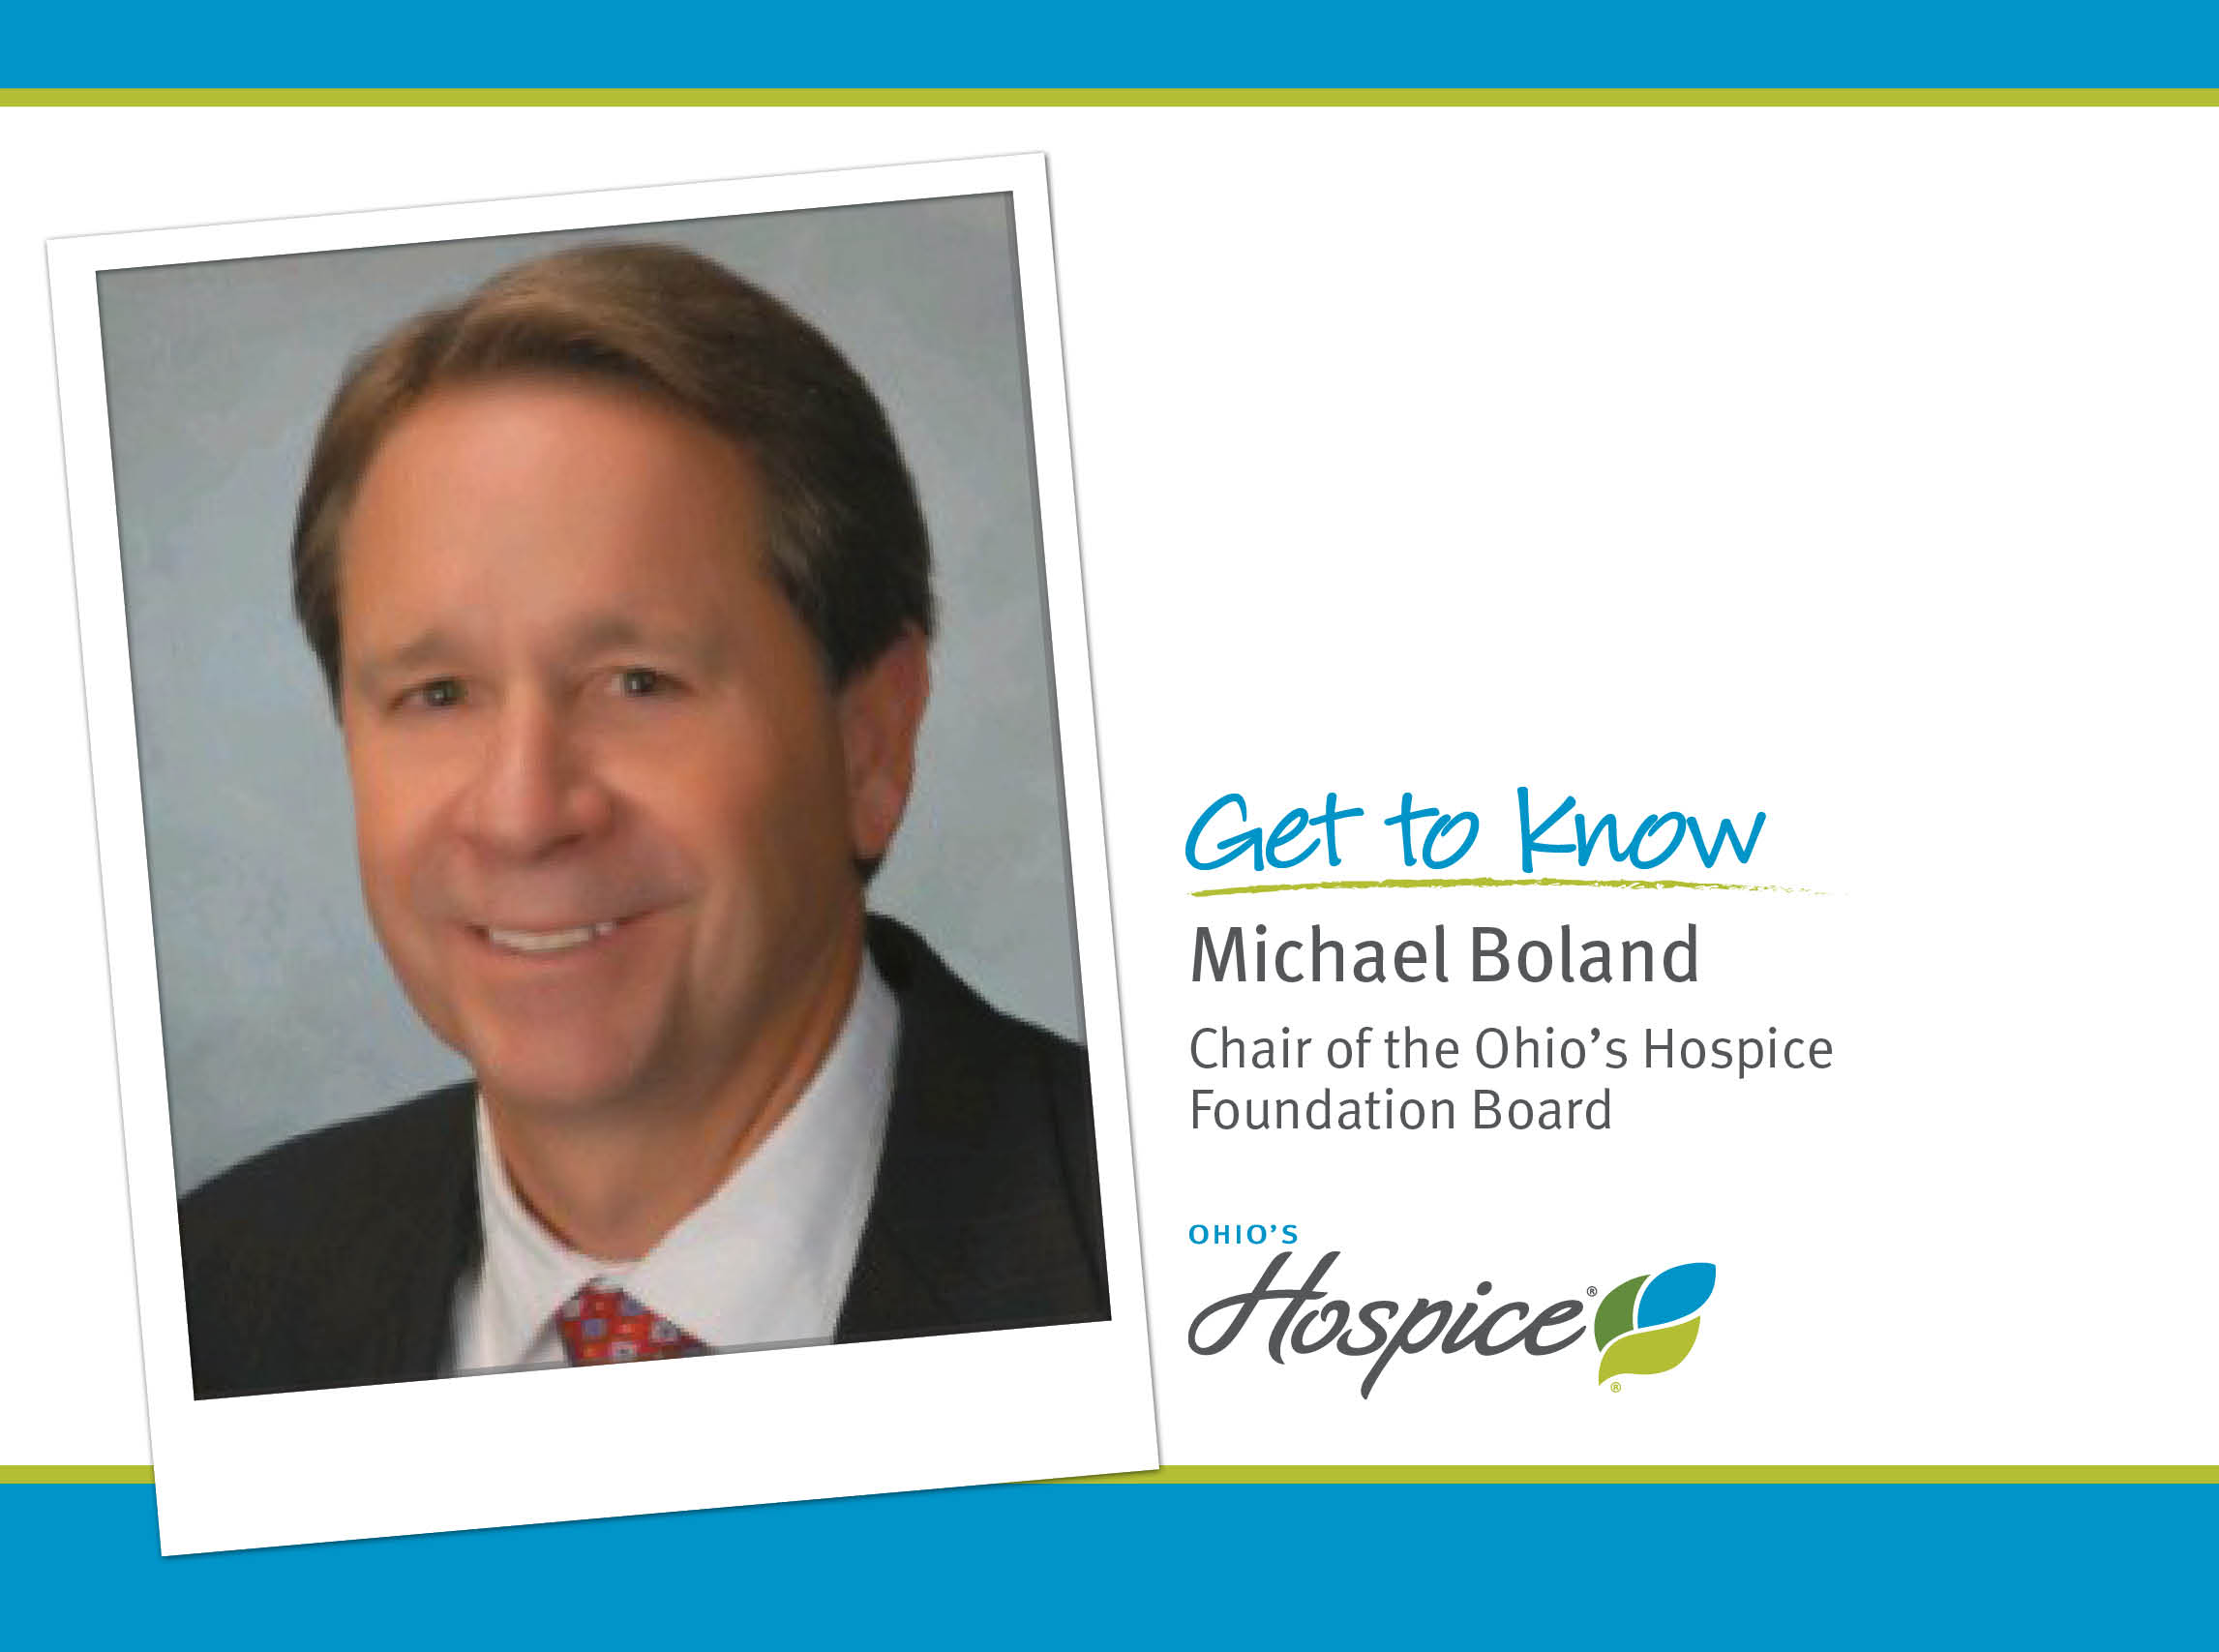 Get to know Michael Boland Chair of the Ohio's Hospice Foundation Board